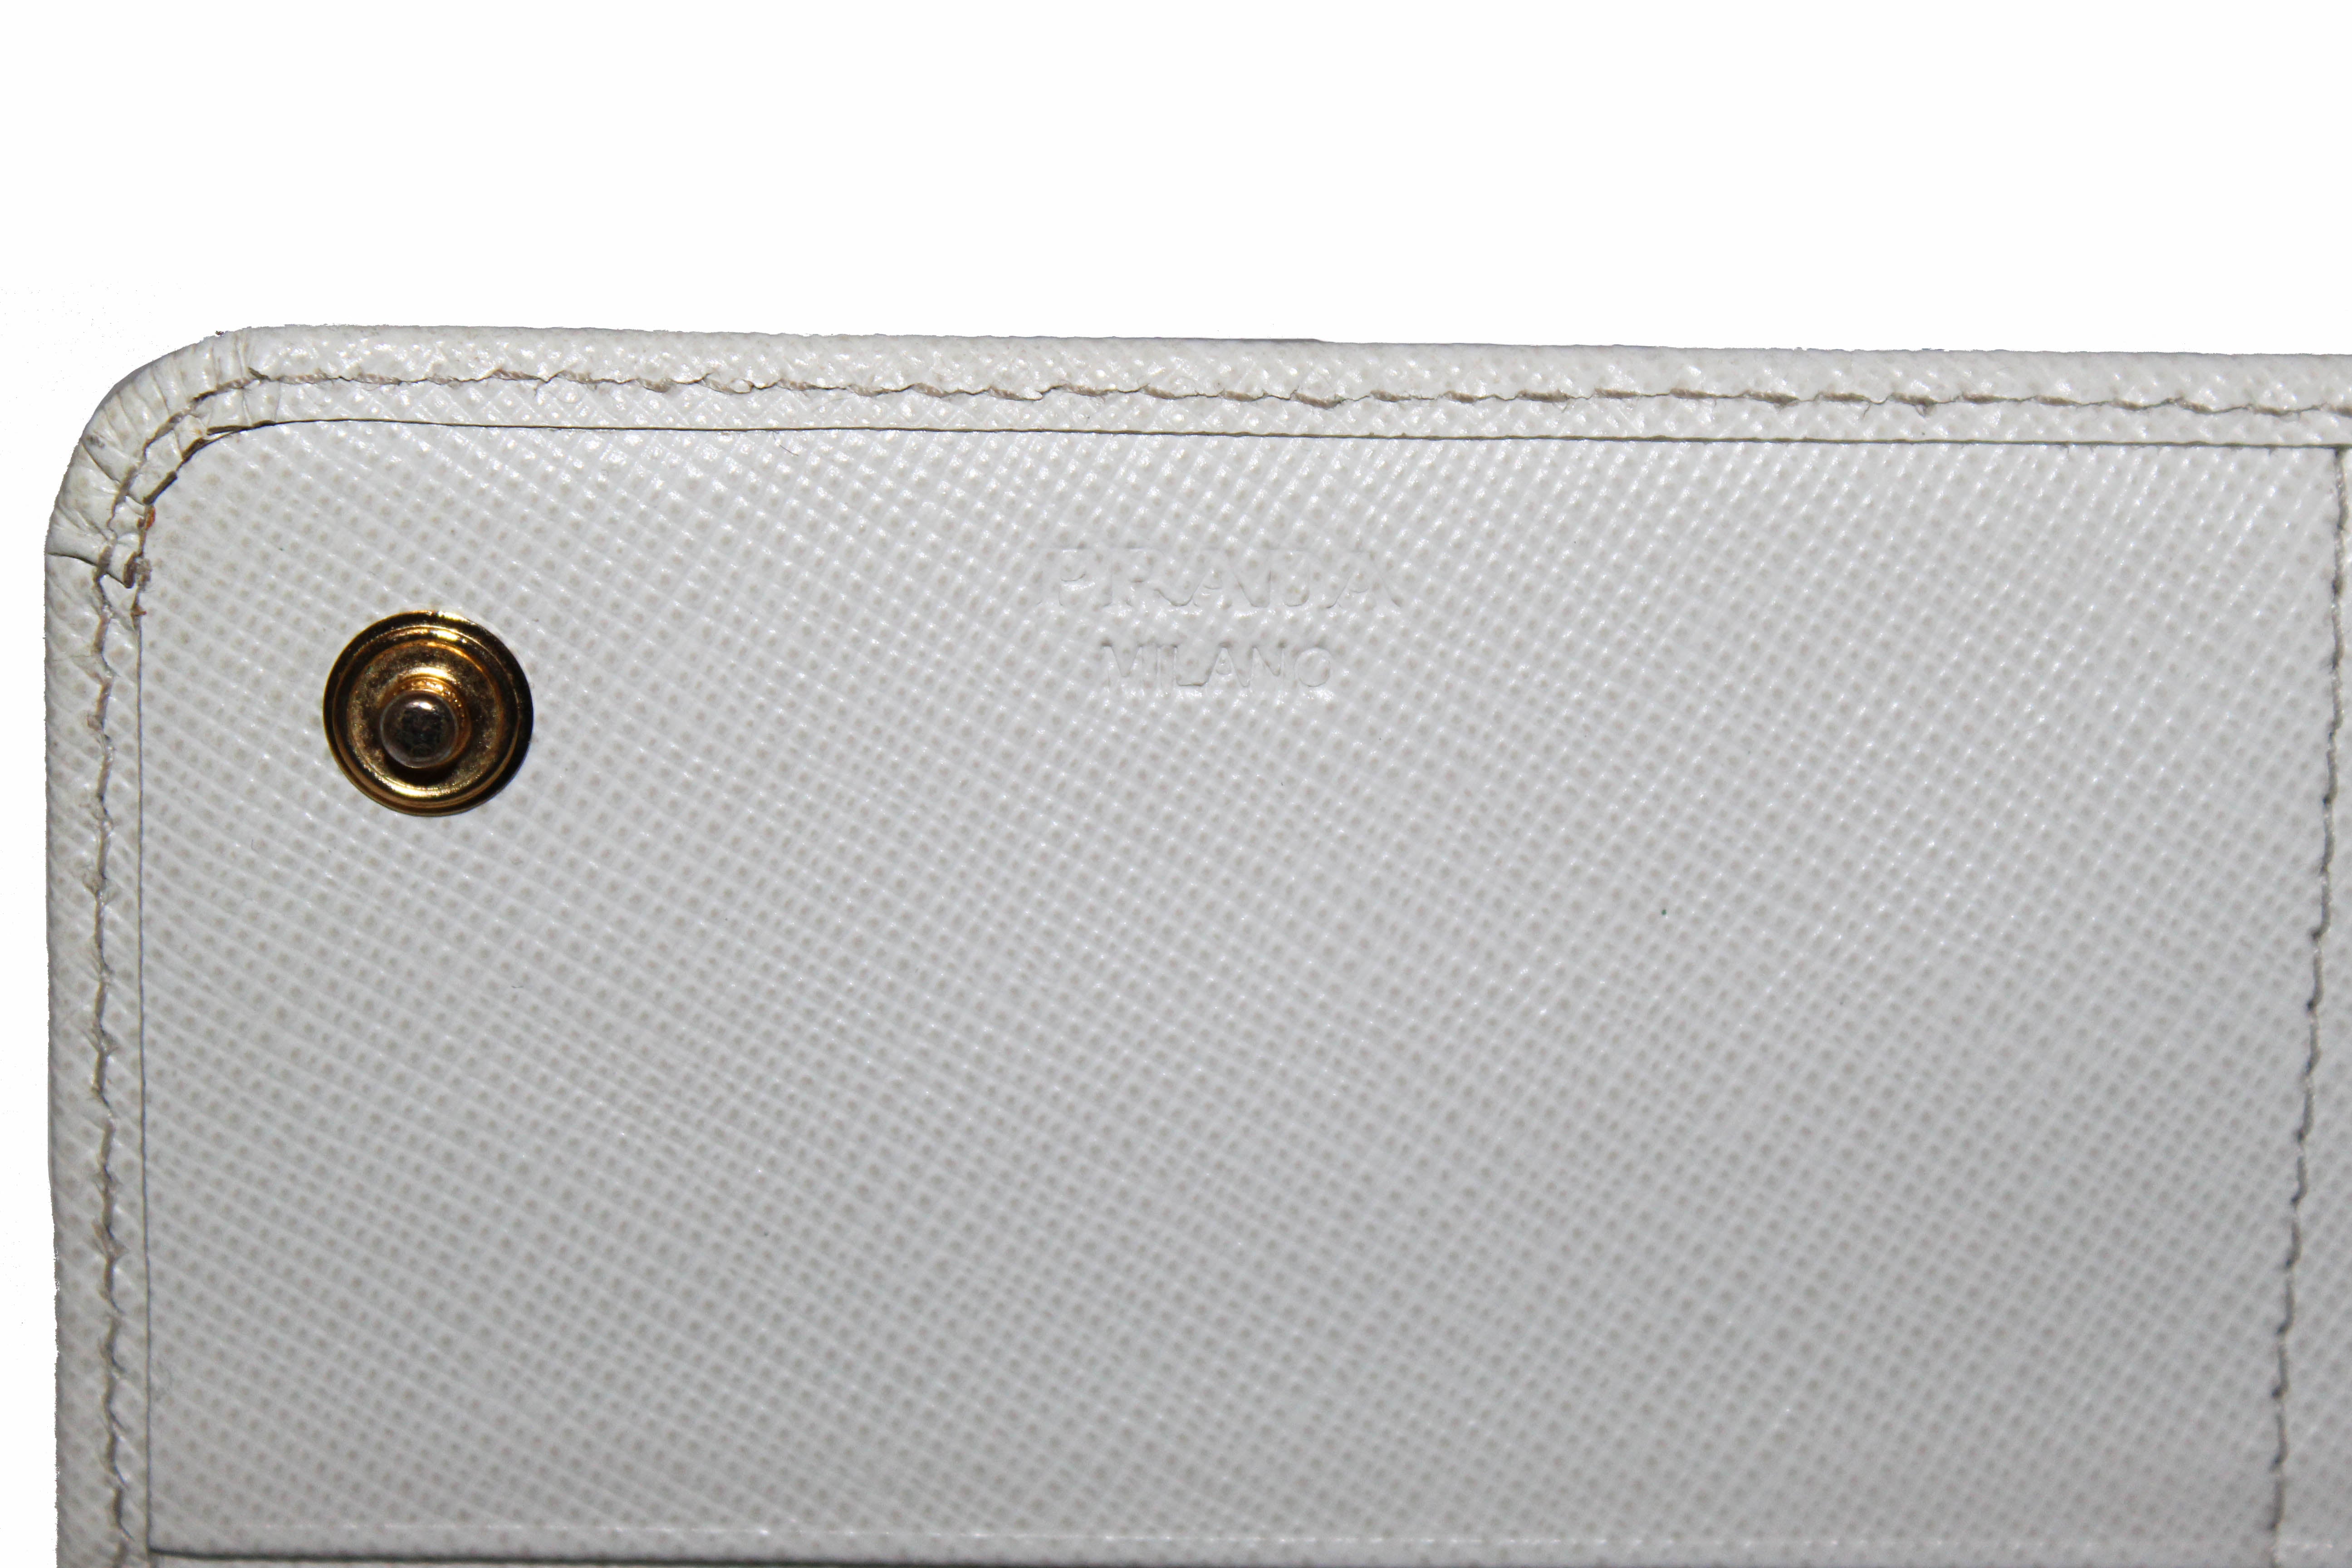 Authentic Prada Ivory Saffiano Leather Continental Flap Wallet